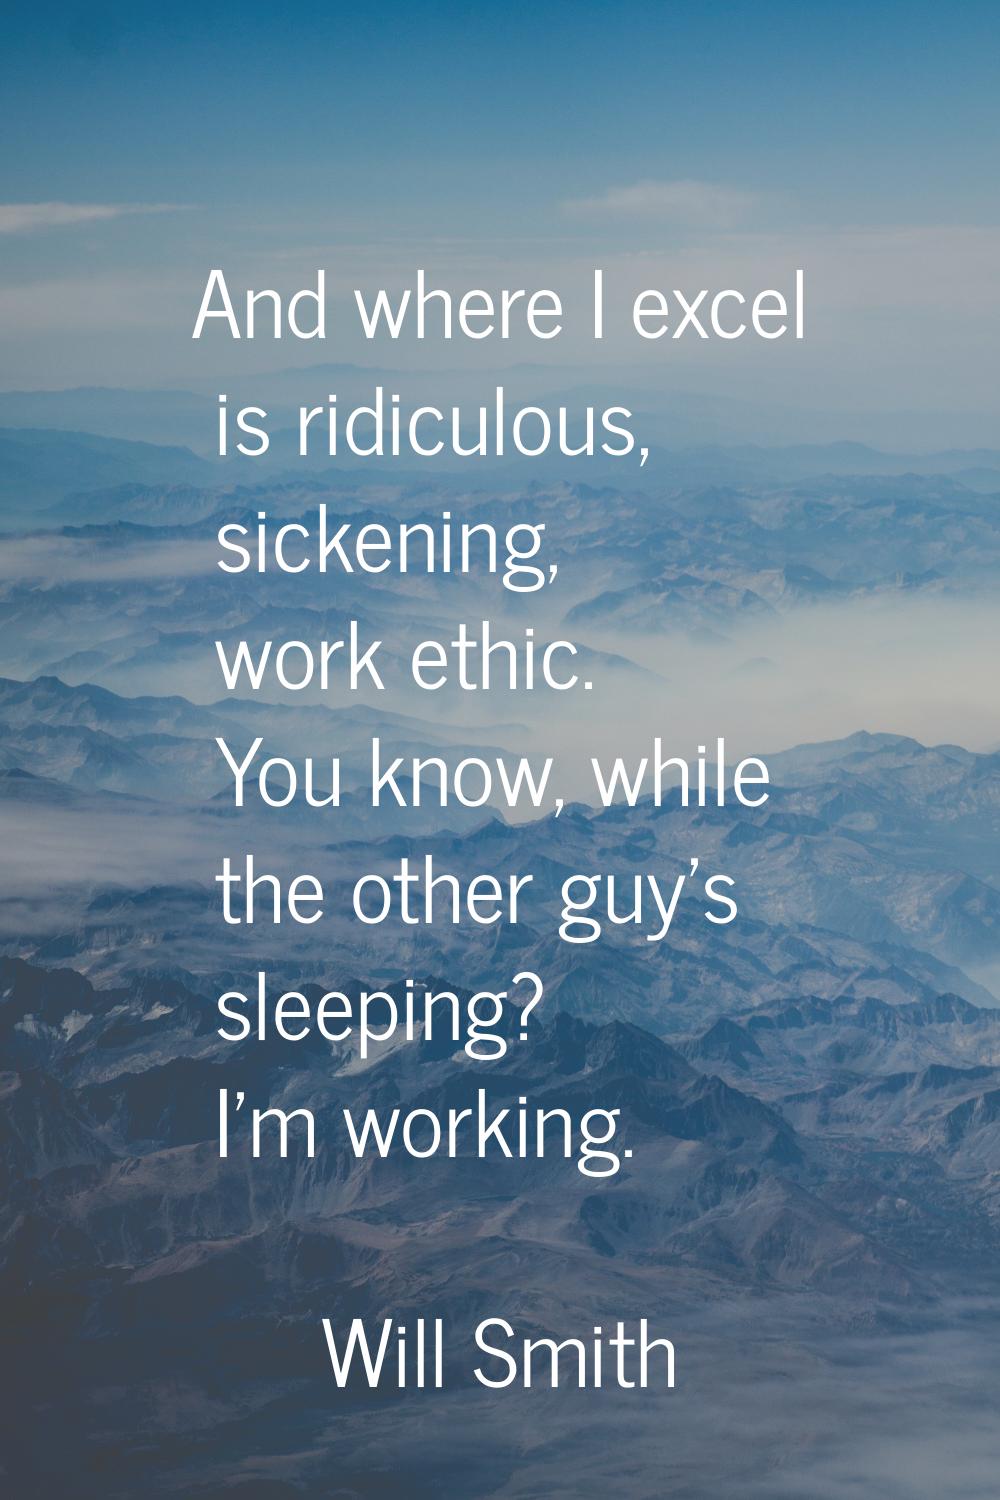 And where I excel is ridiculous, sickening, work ethic. You know, while the other guy's sleeping? I